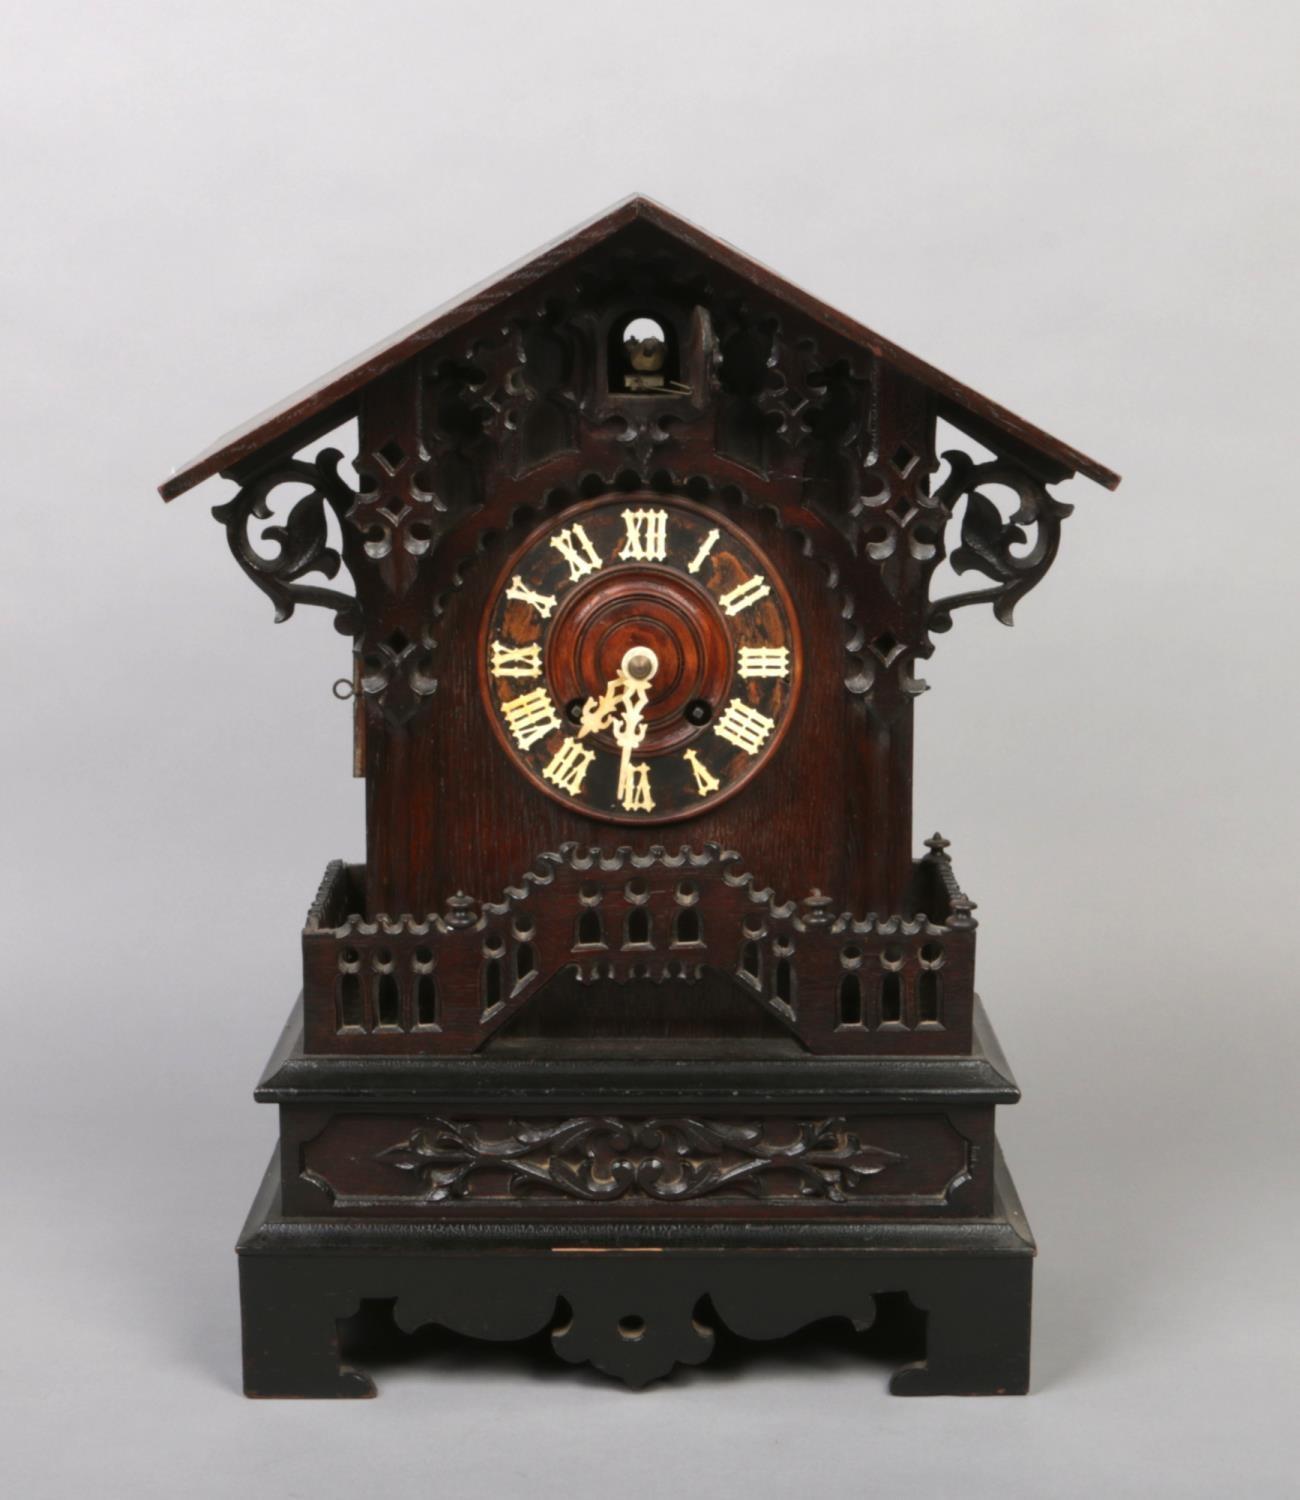 A 19th century Black Forest cuckoo mantel clock. With triangular pediment, acanthus scrolling